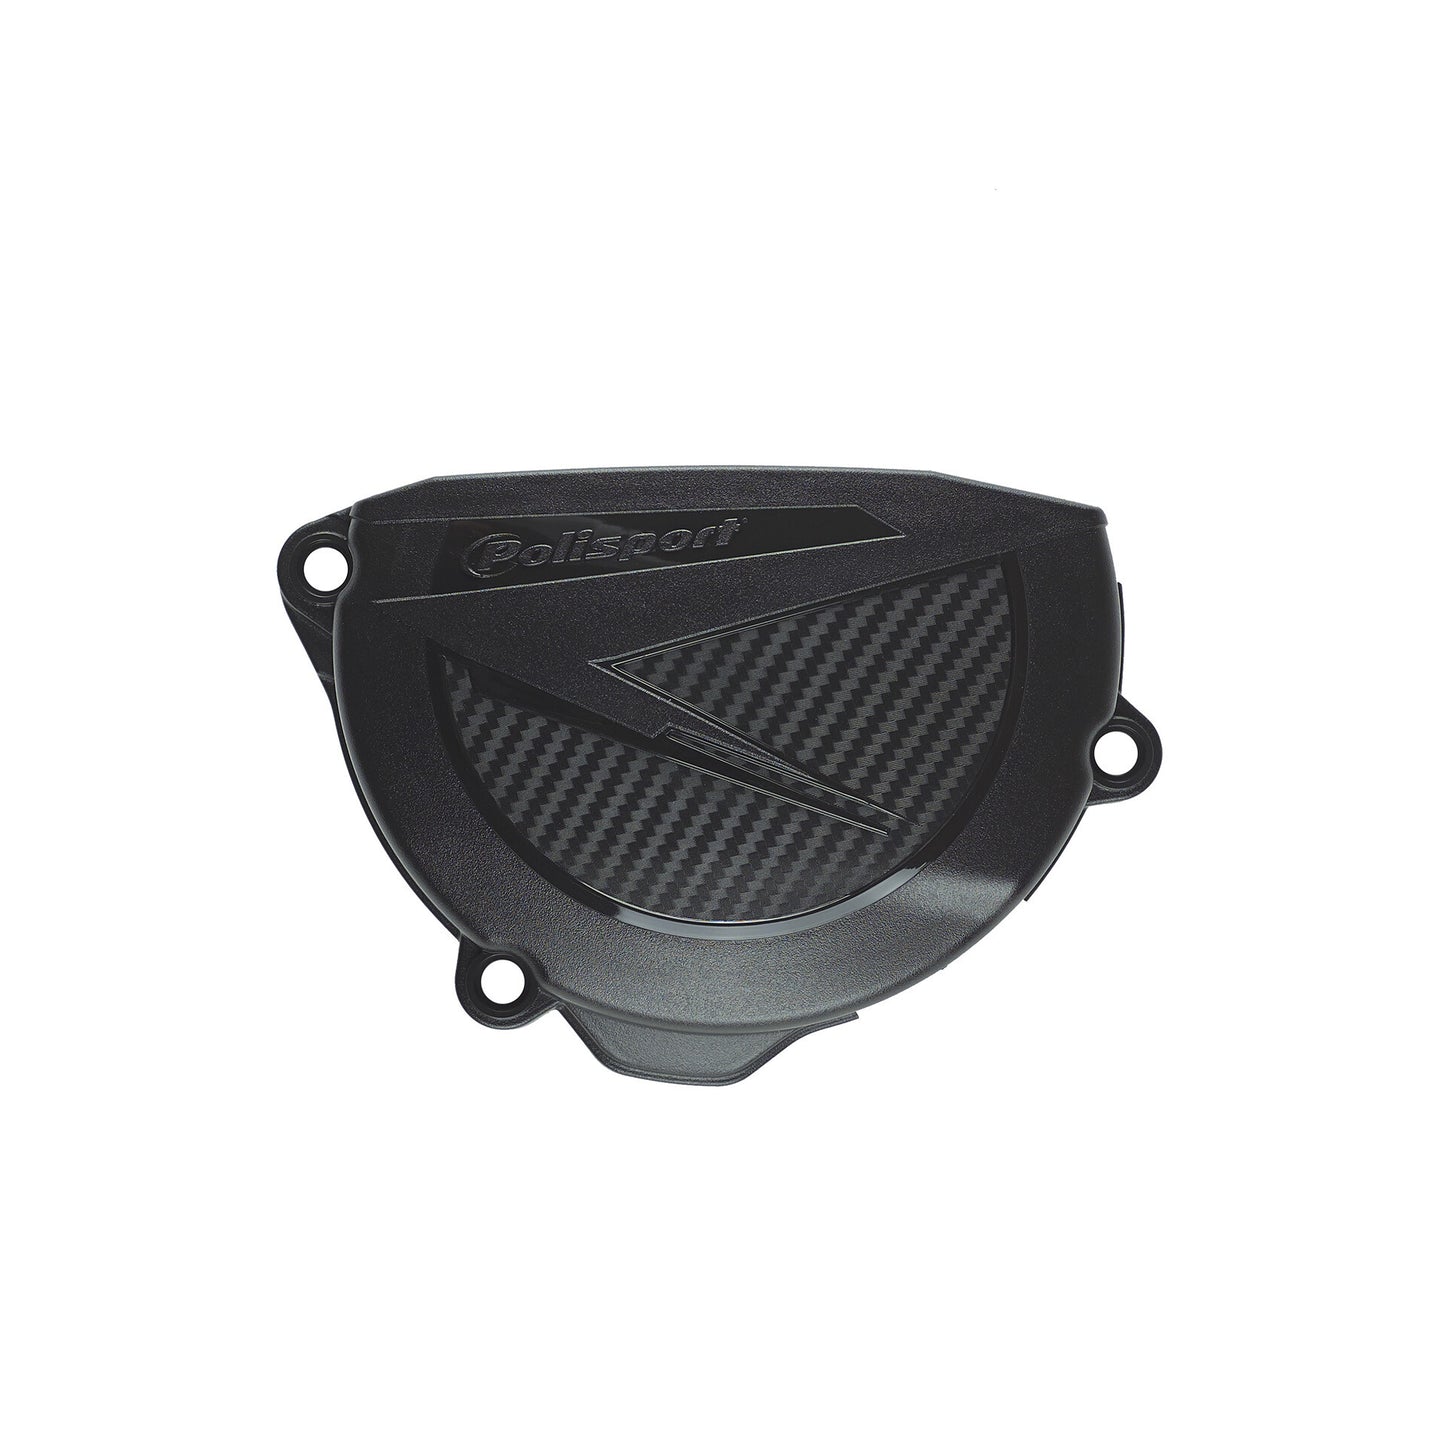 CLUTCH COVER PROTECTOR KTM BLACK